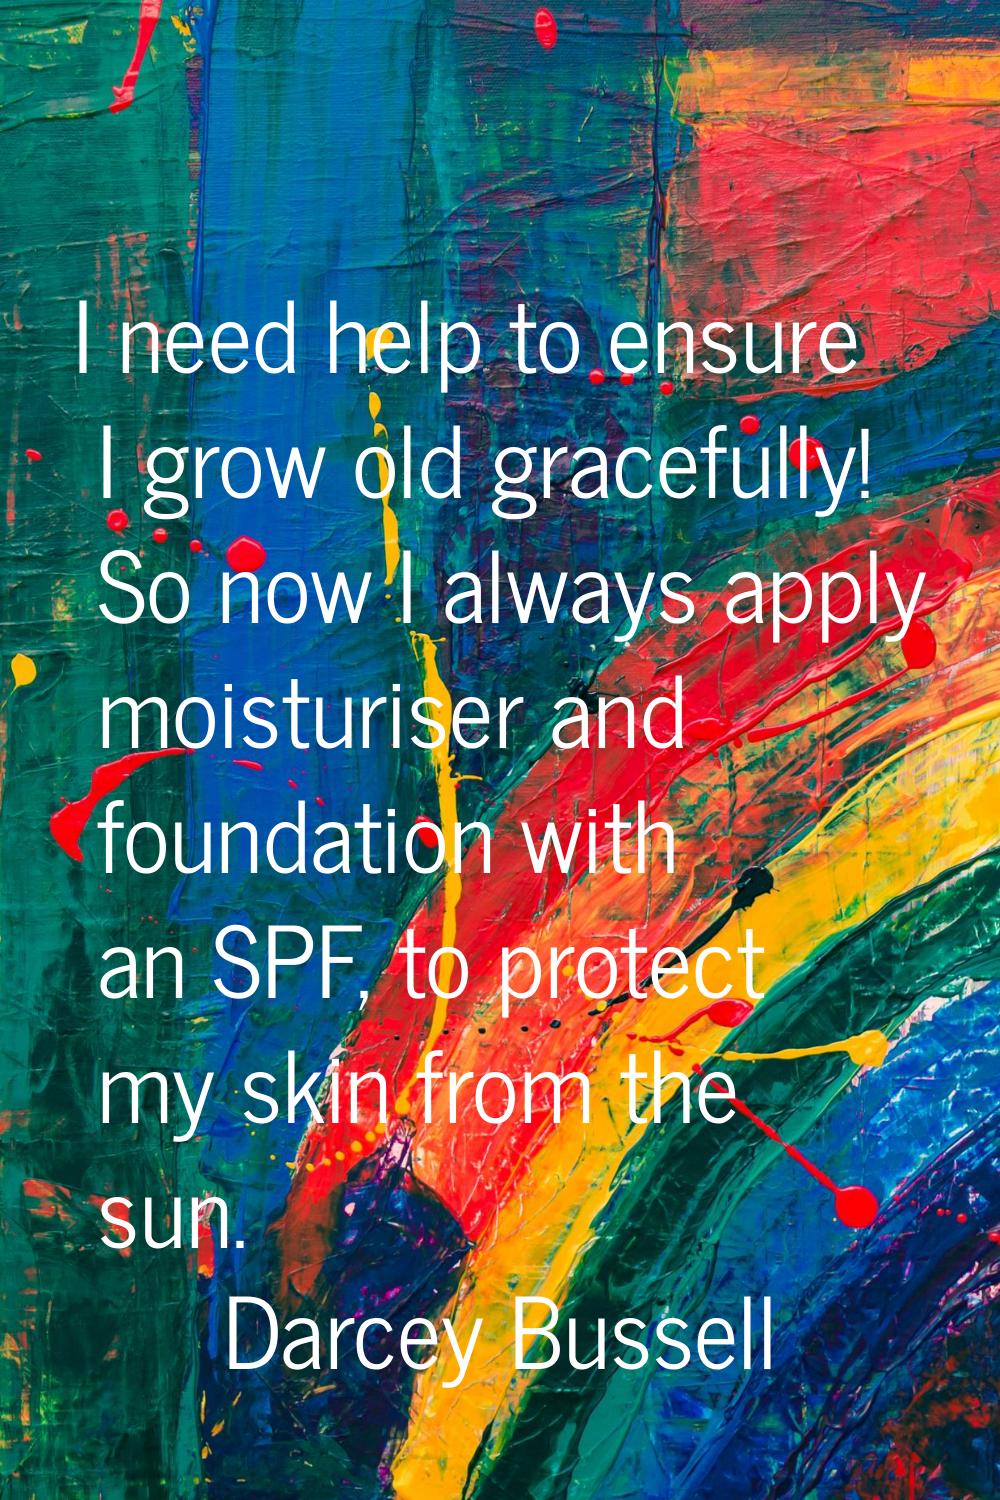 I need help to ensure I grow old gracefully! So now I always apply moisturiser and foundation with 